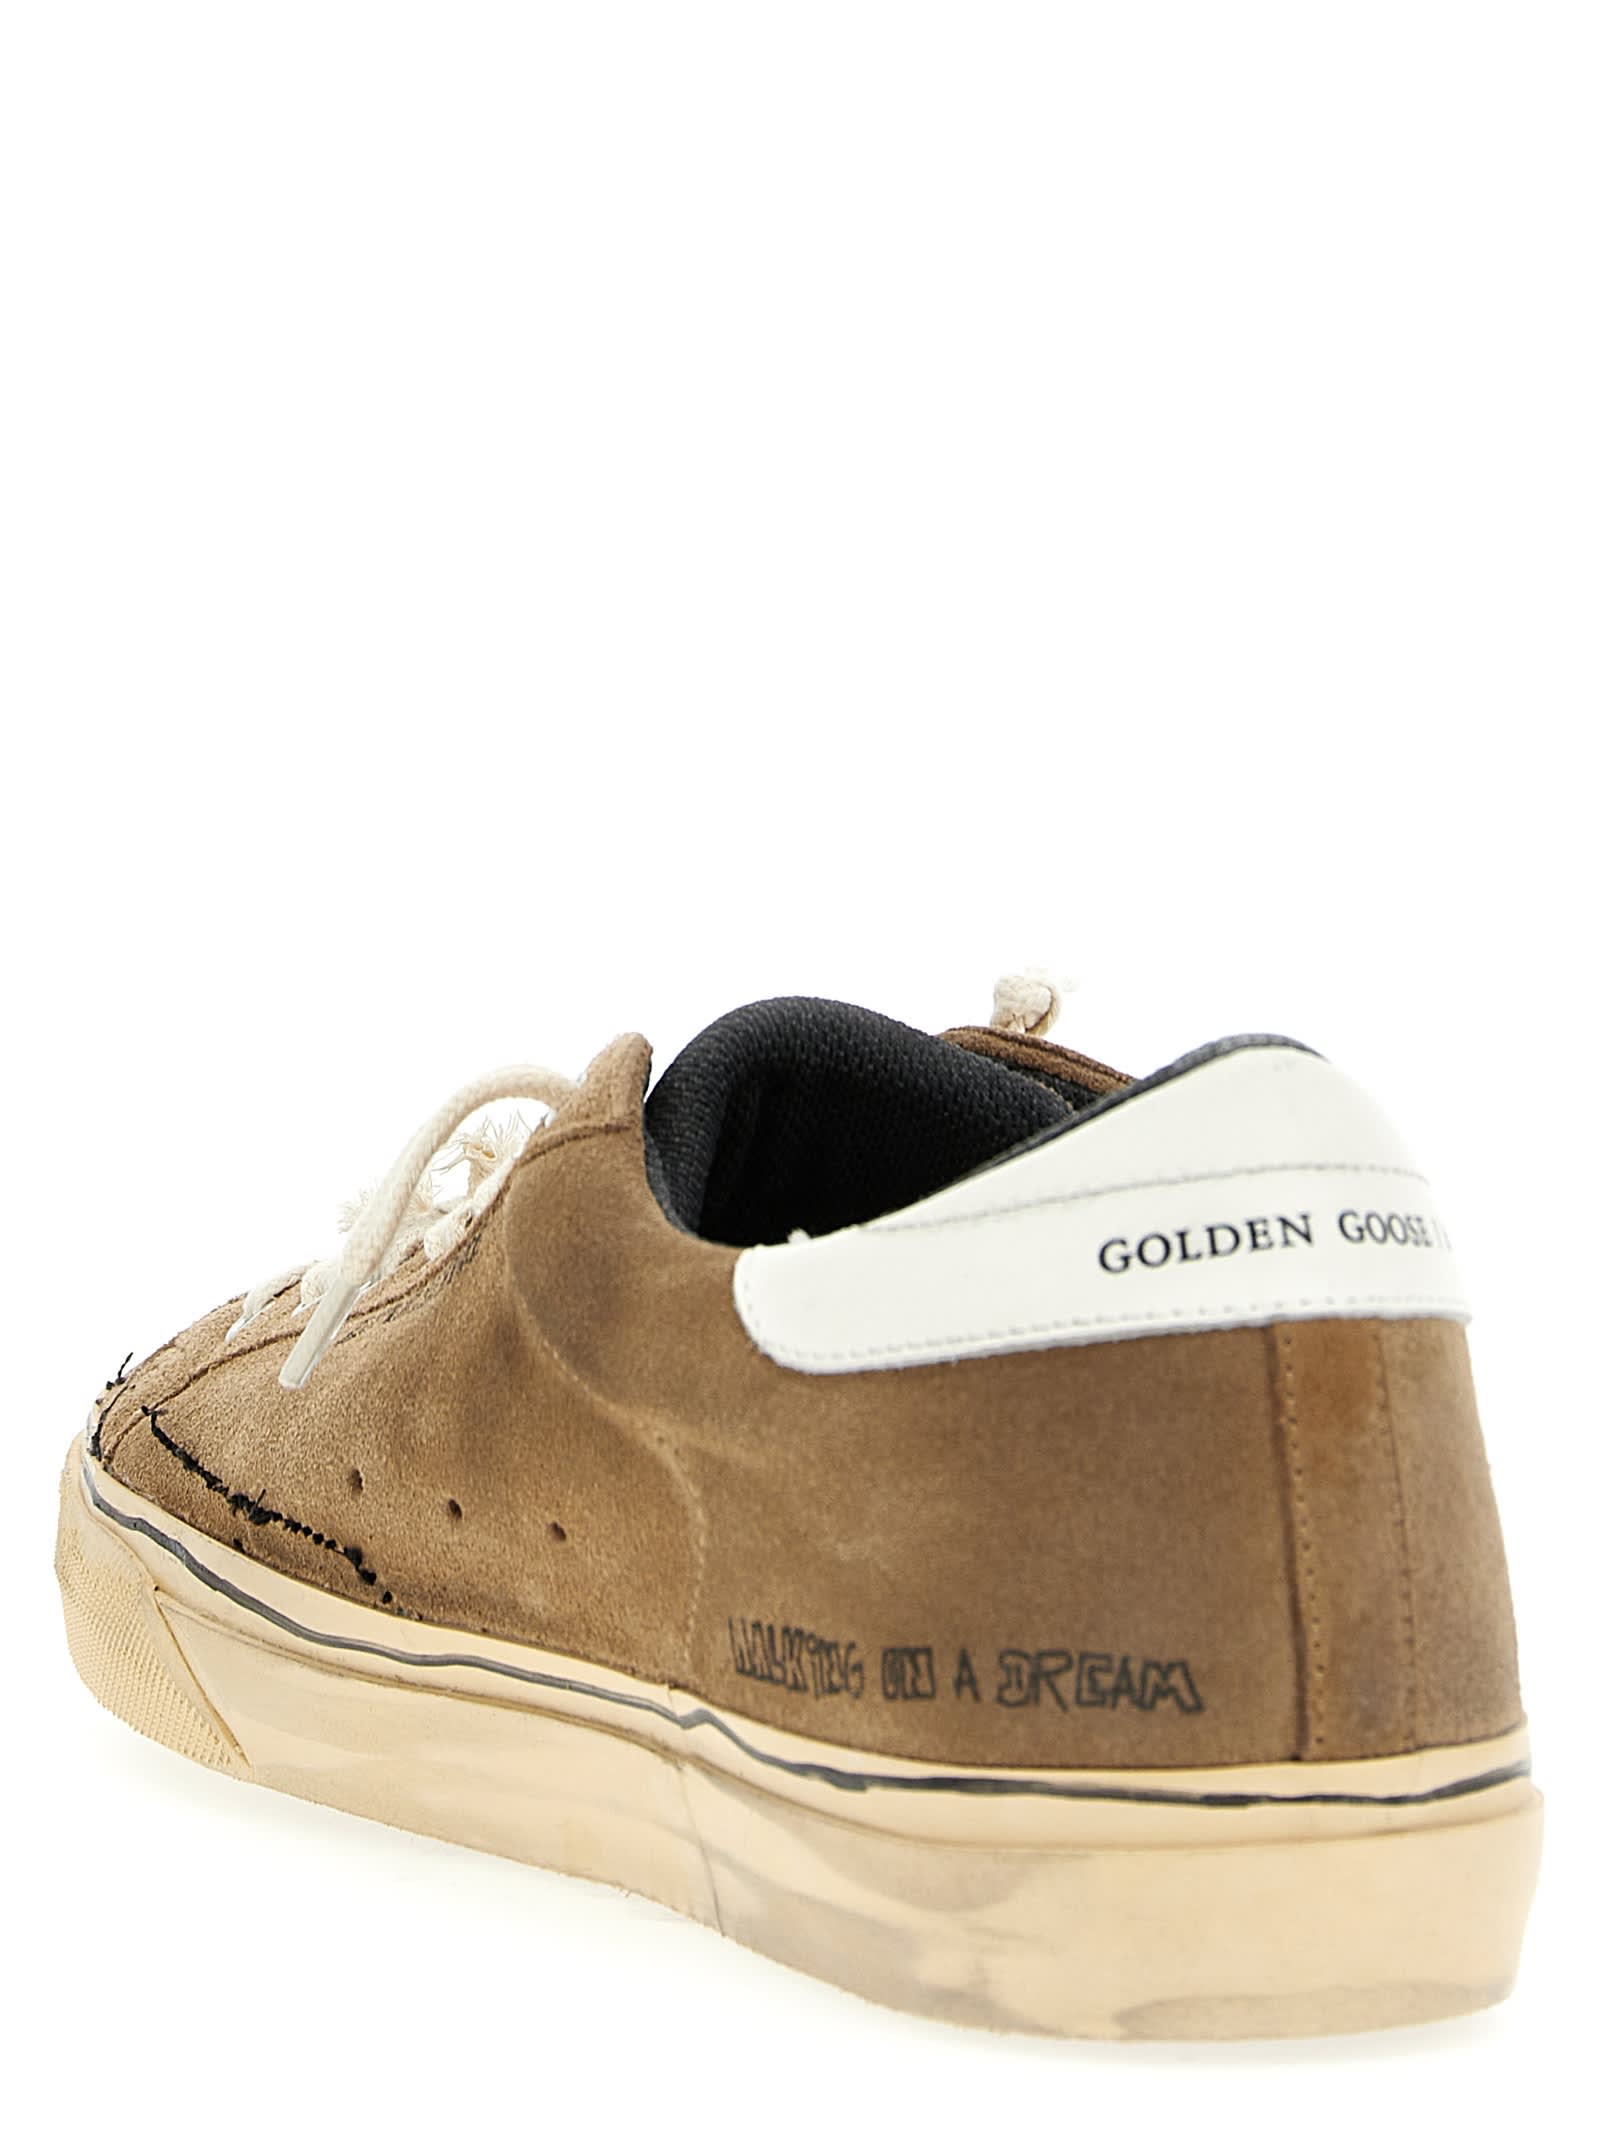 Shop Golden Goose Superstar Sneakers In Tabacco/white